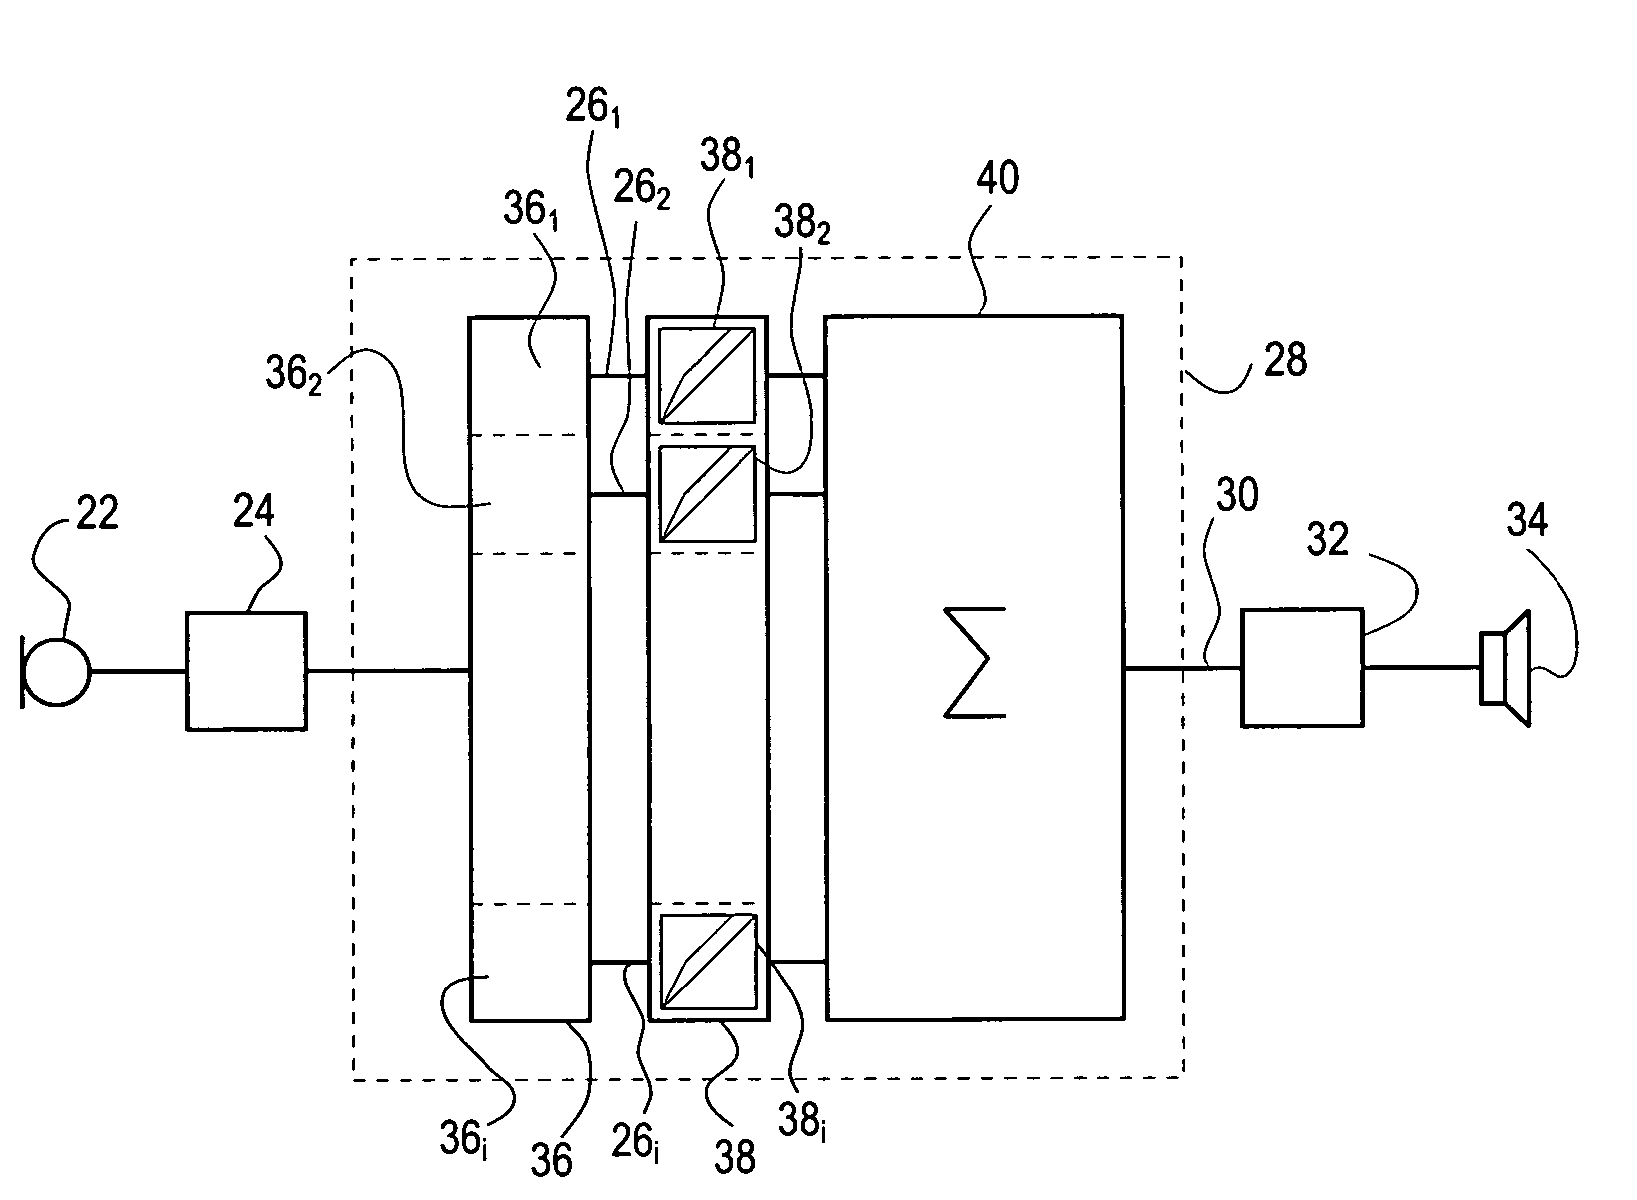 Method of processing a sound signal in a hearing aid